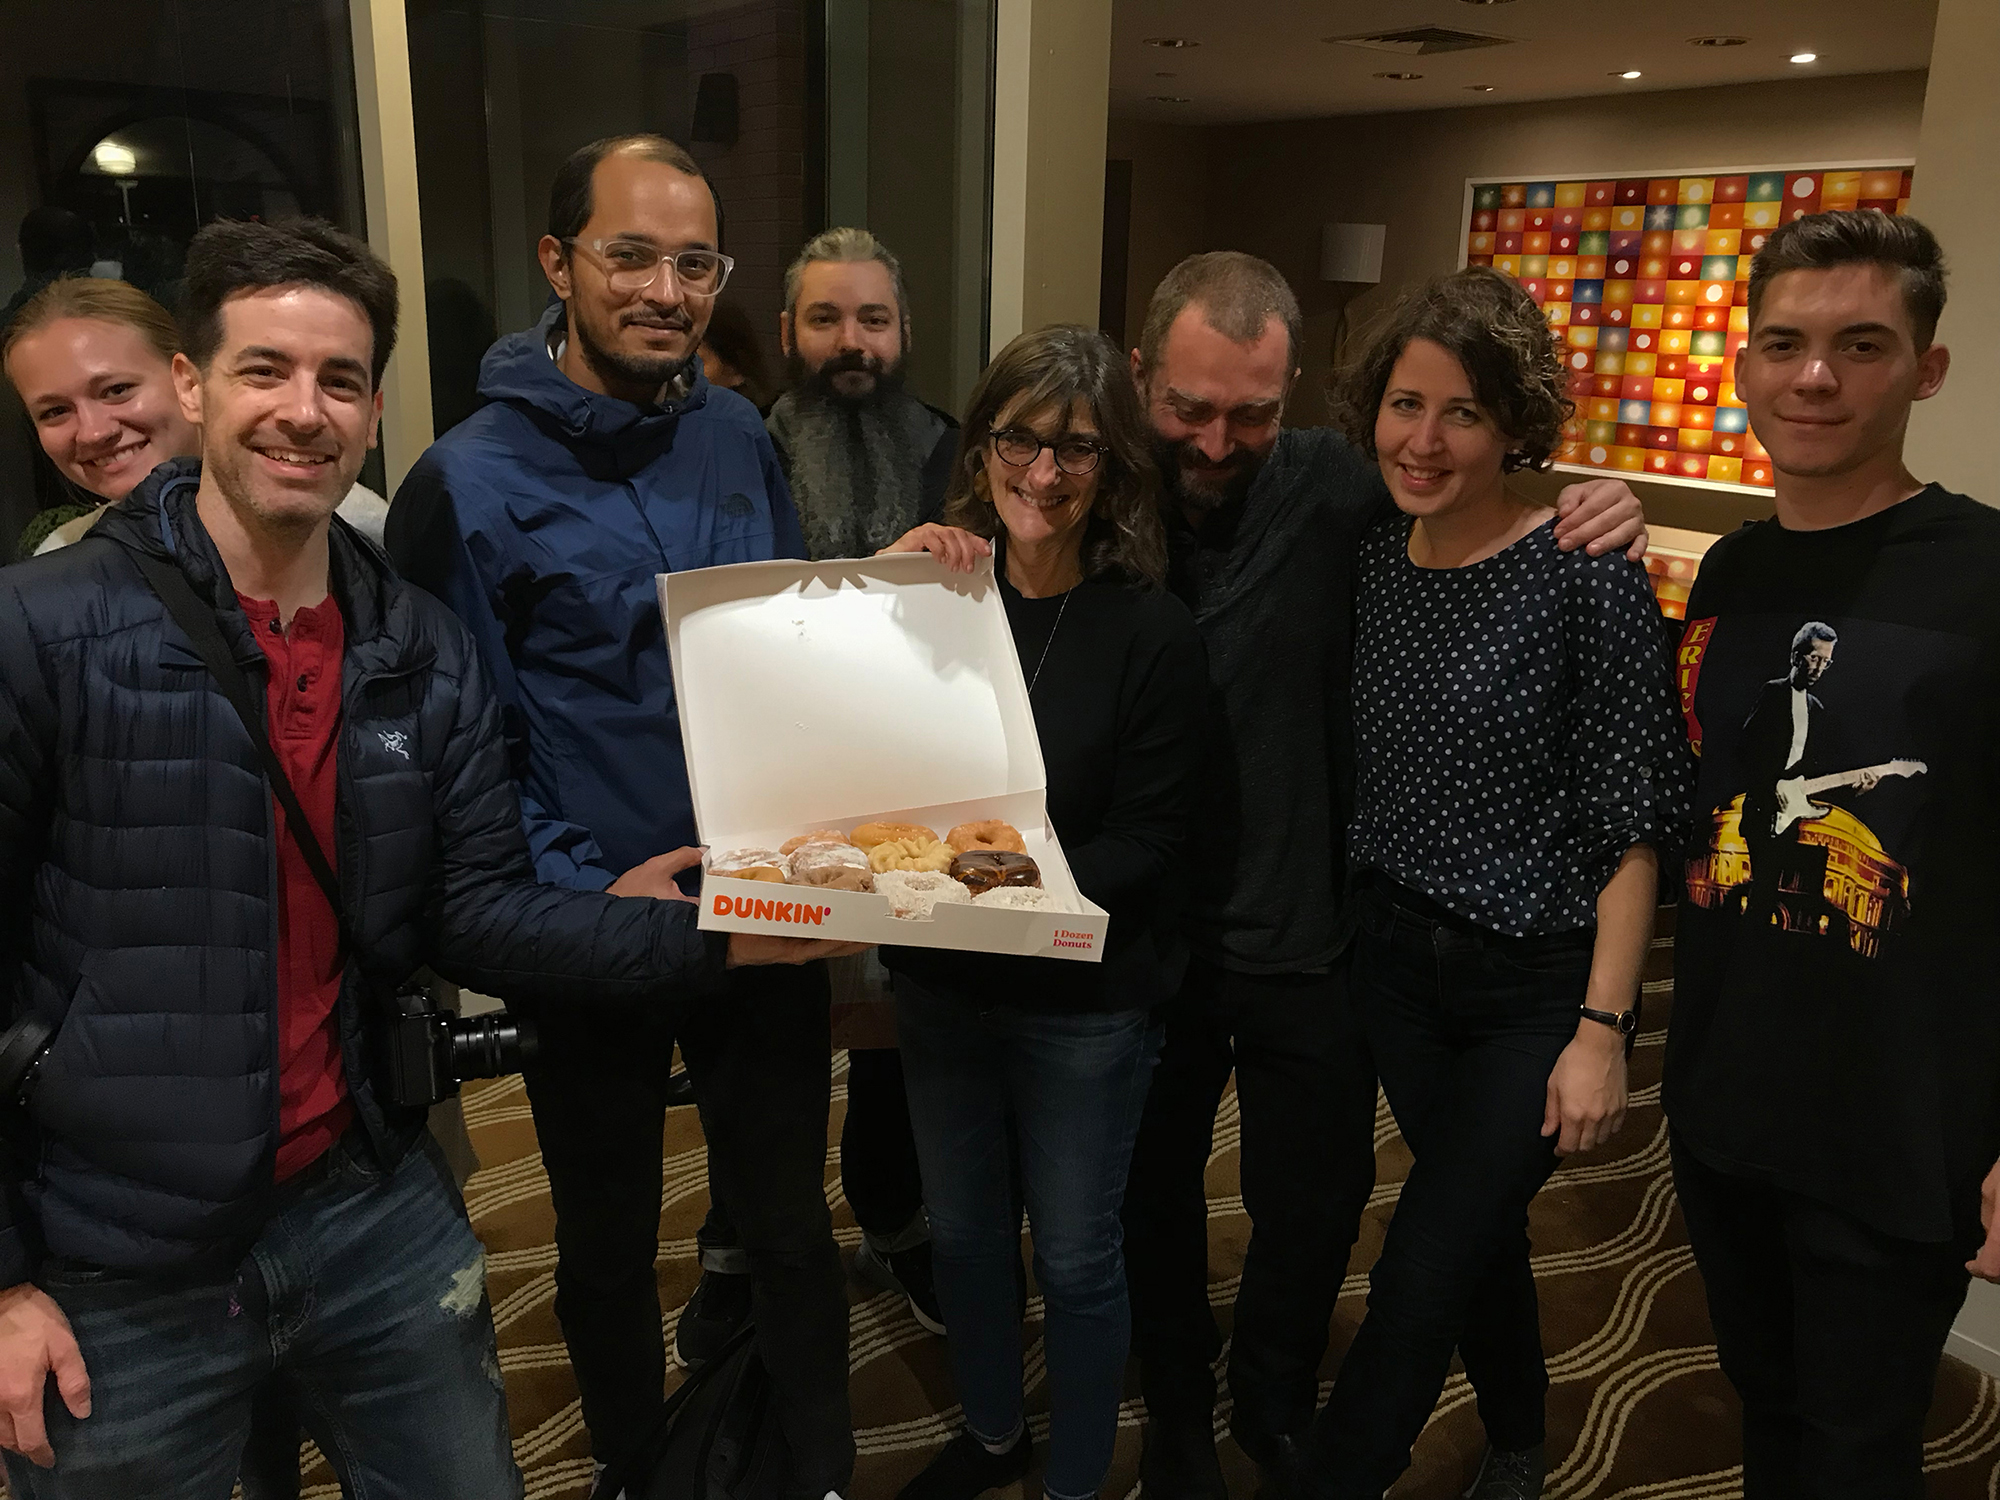 A group of people gather around a box of doughnuts.